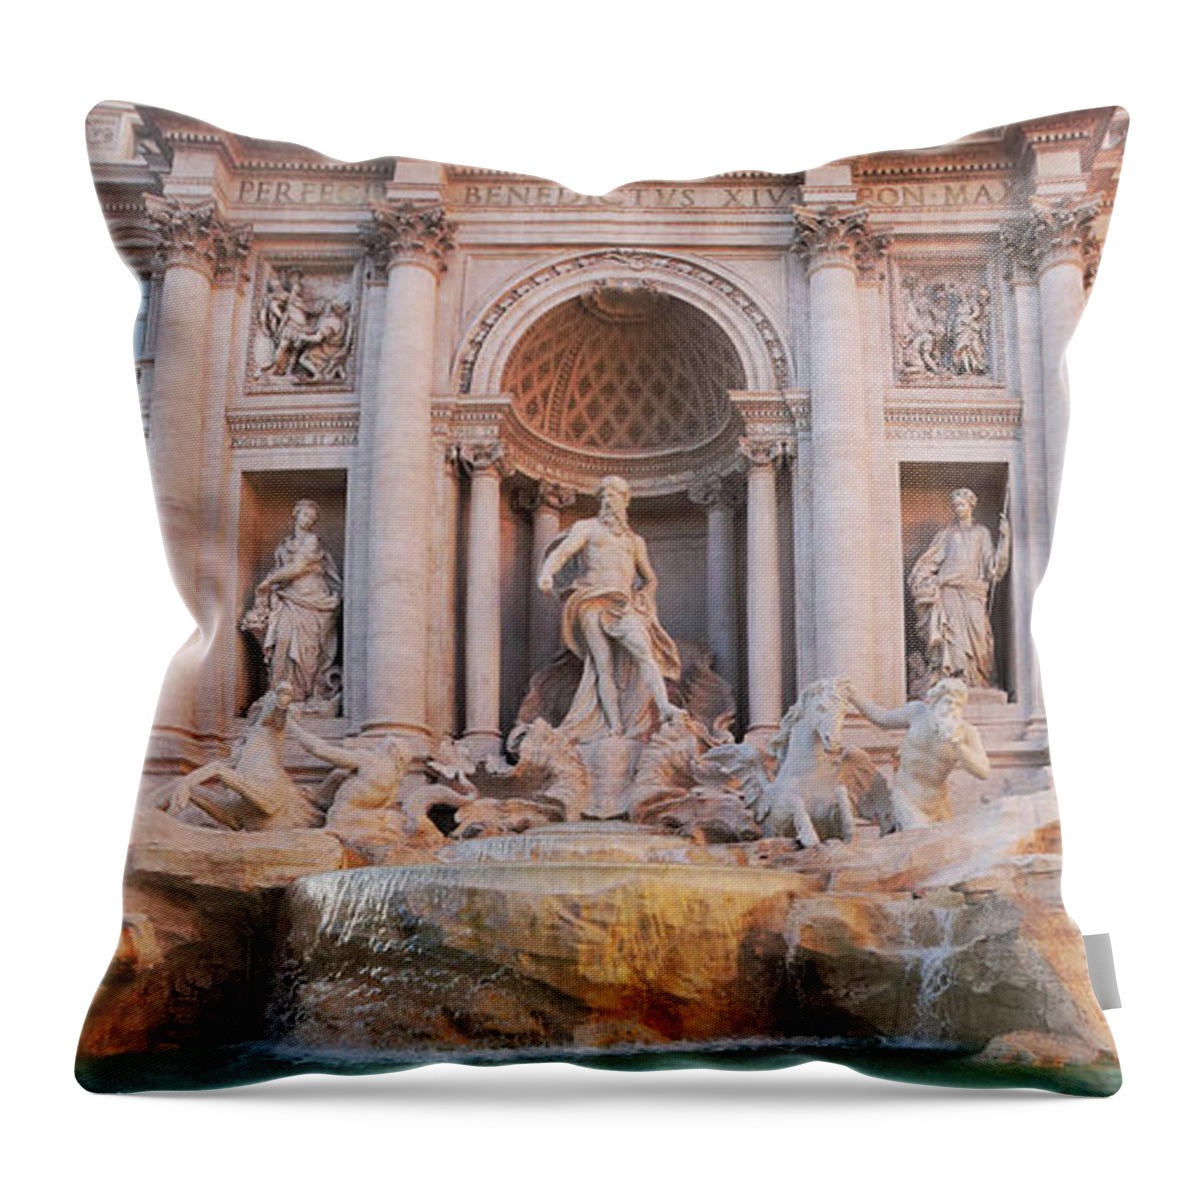 Prott Throw Pillow featuring the photograph Trevi fountain 2 by Rudi Prott